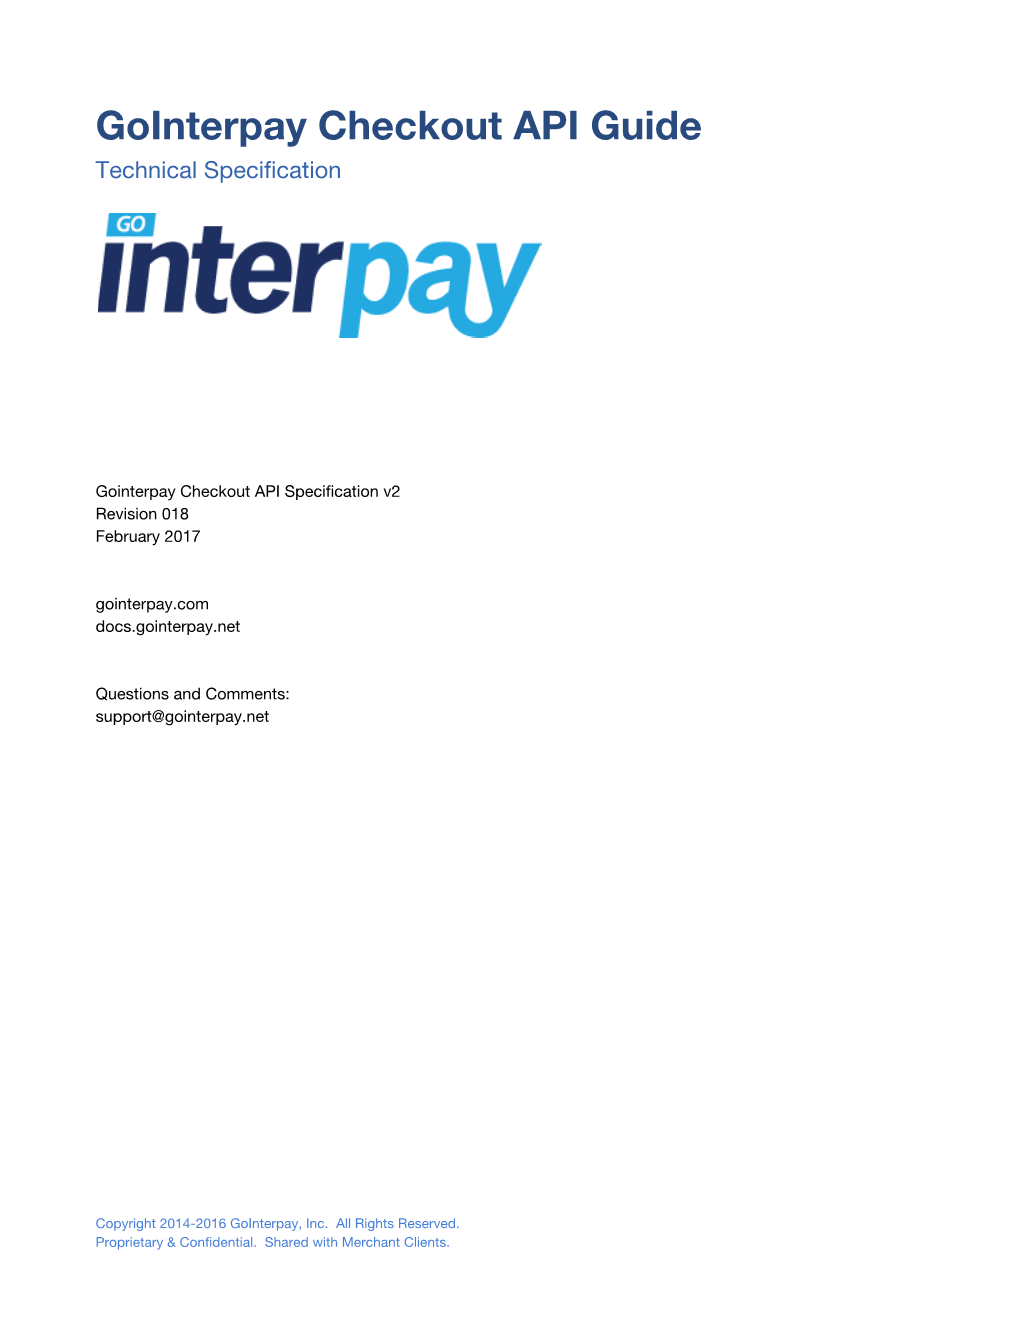 Gointerpay Checkout API Guide Technical Specification